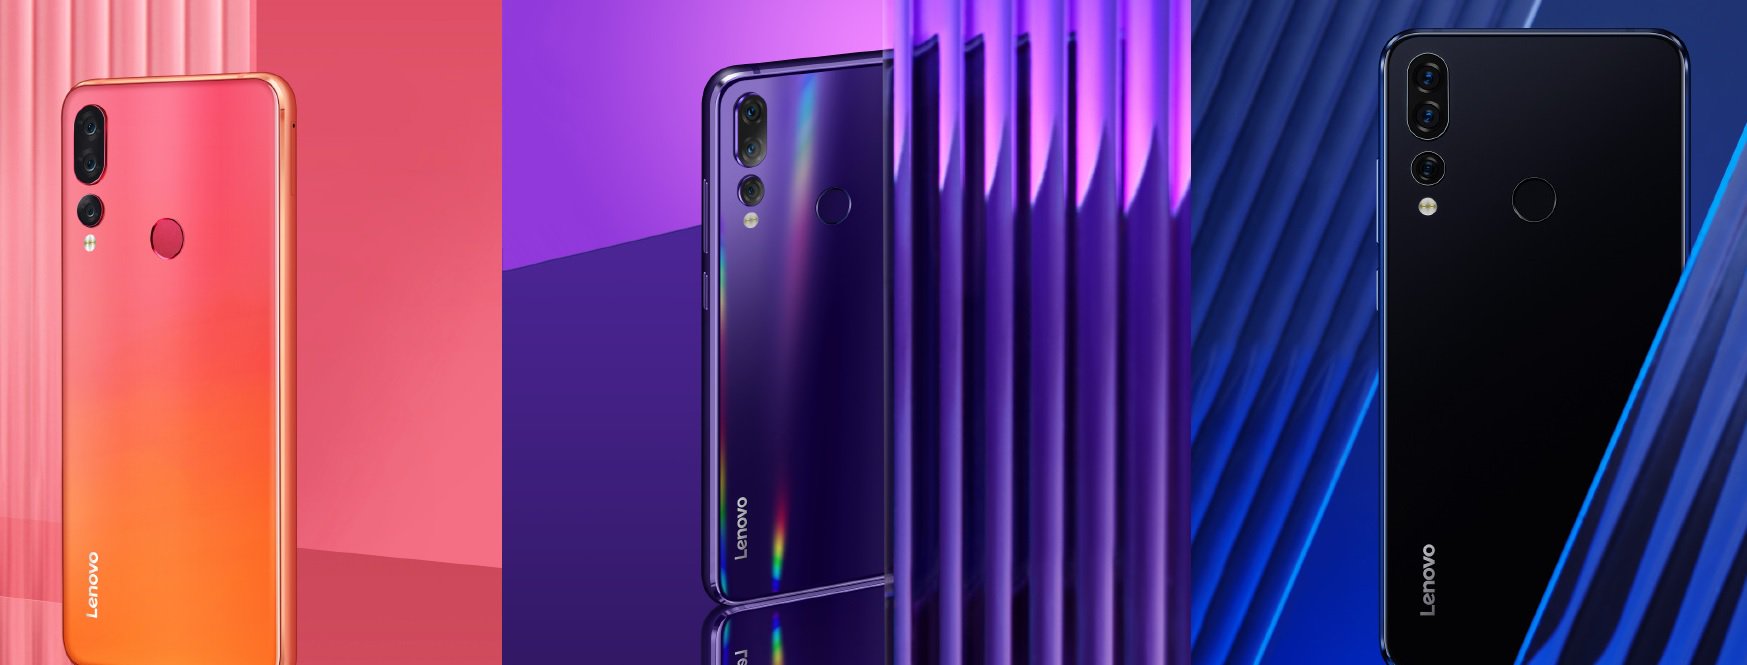 Lenovo Z5s Promotional Banner Leak Displays Snapdragon 710 Soc And 92.6% Microporous Drop Present